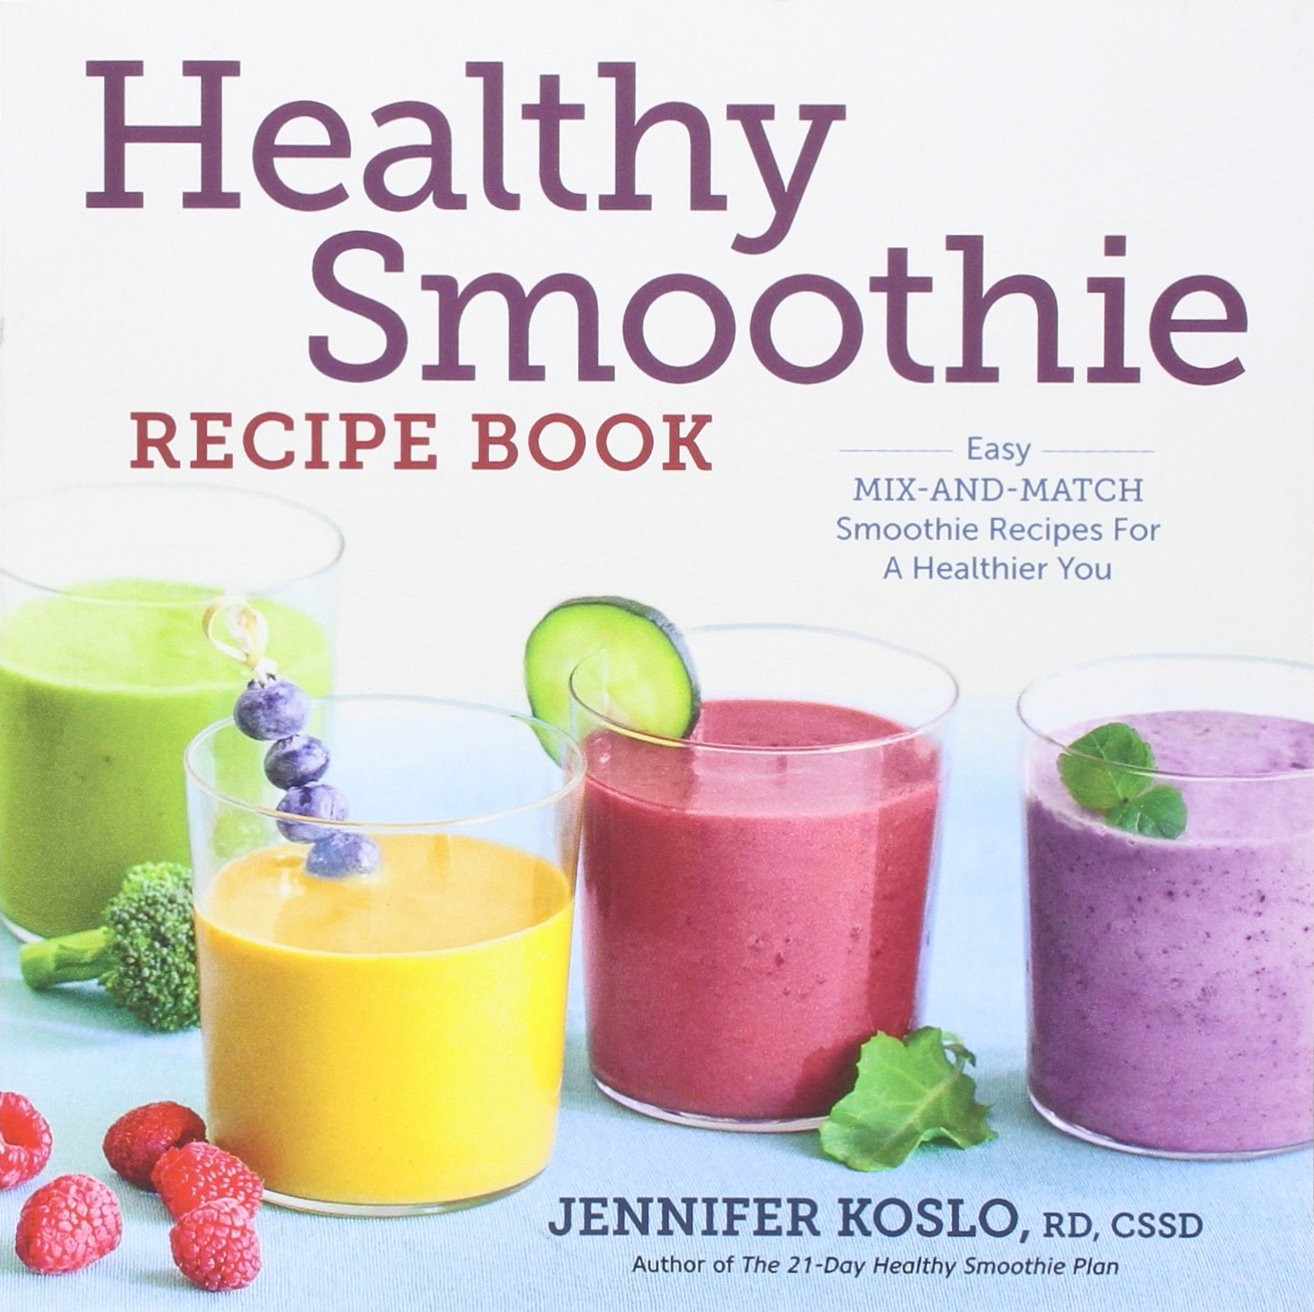 Healthy Smoothie Recipes
 Cheapest copy of Healthy Smoothie Recipe Book Easy Mix